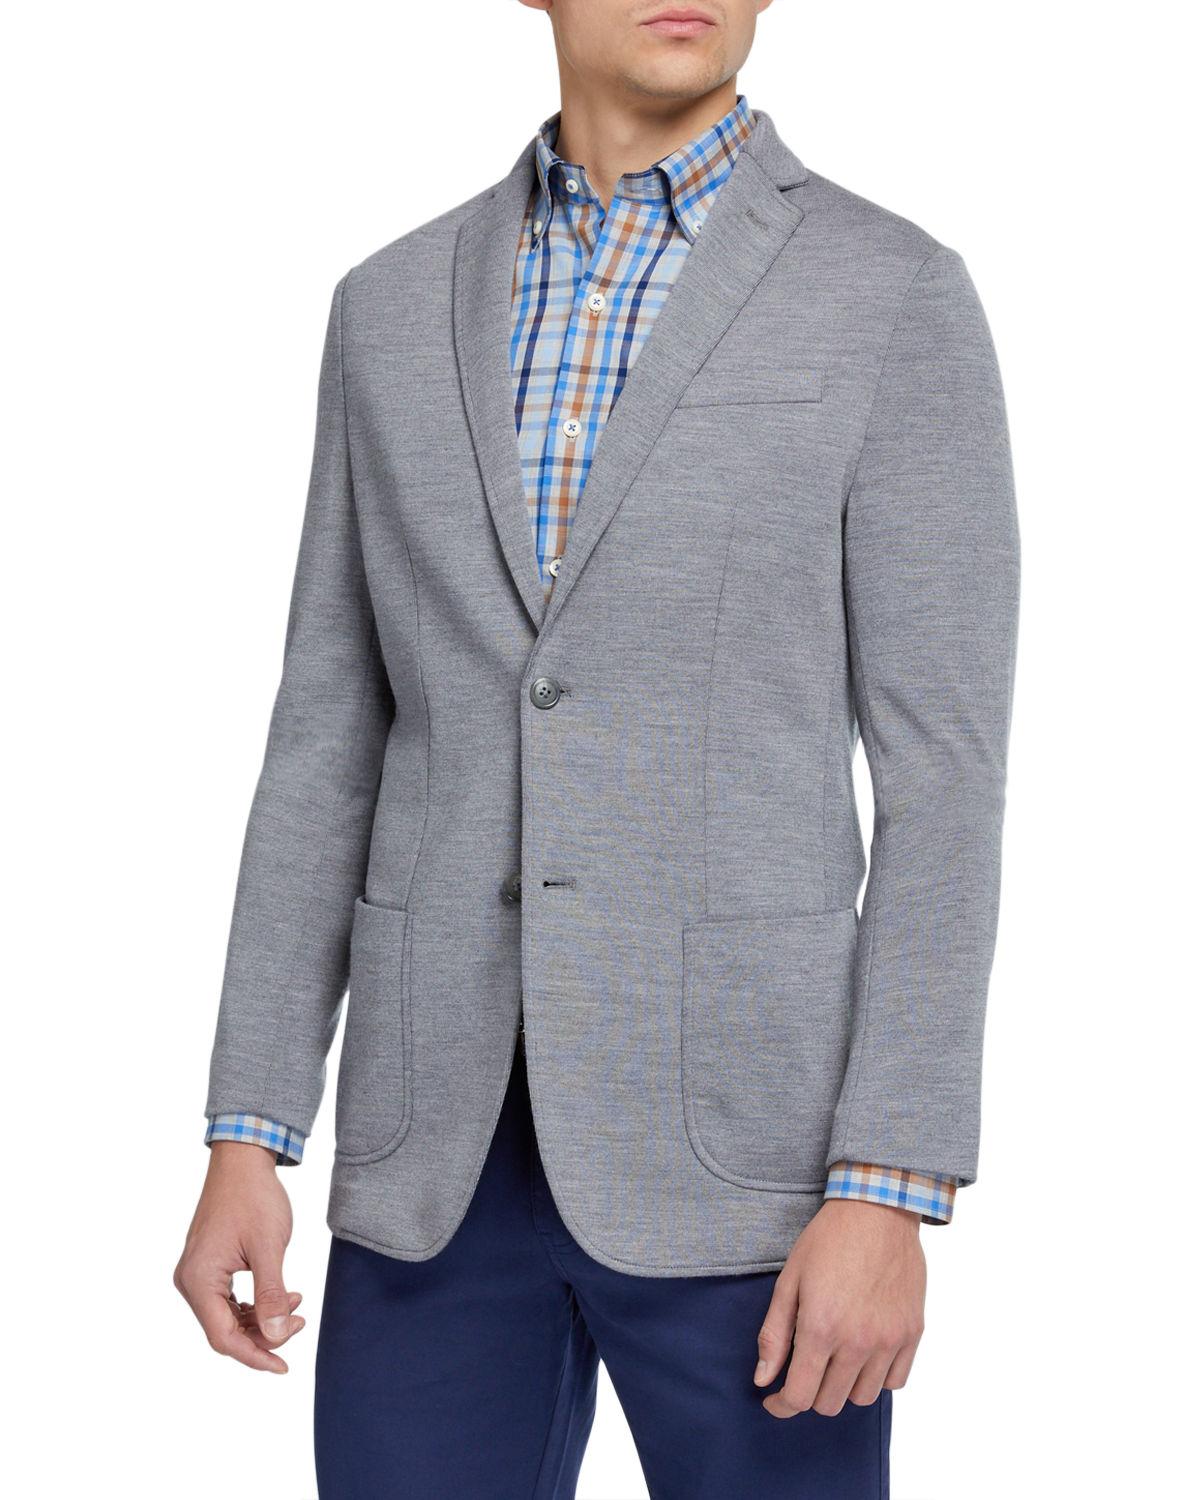 Peter Millar Wool Men's Heathered Two-button Jacket in Gray for Men - Lyst